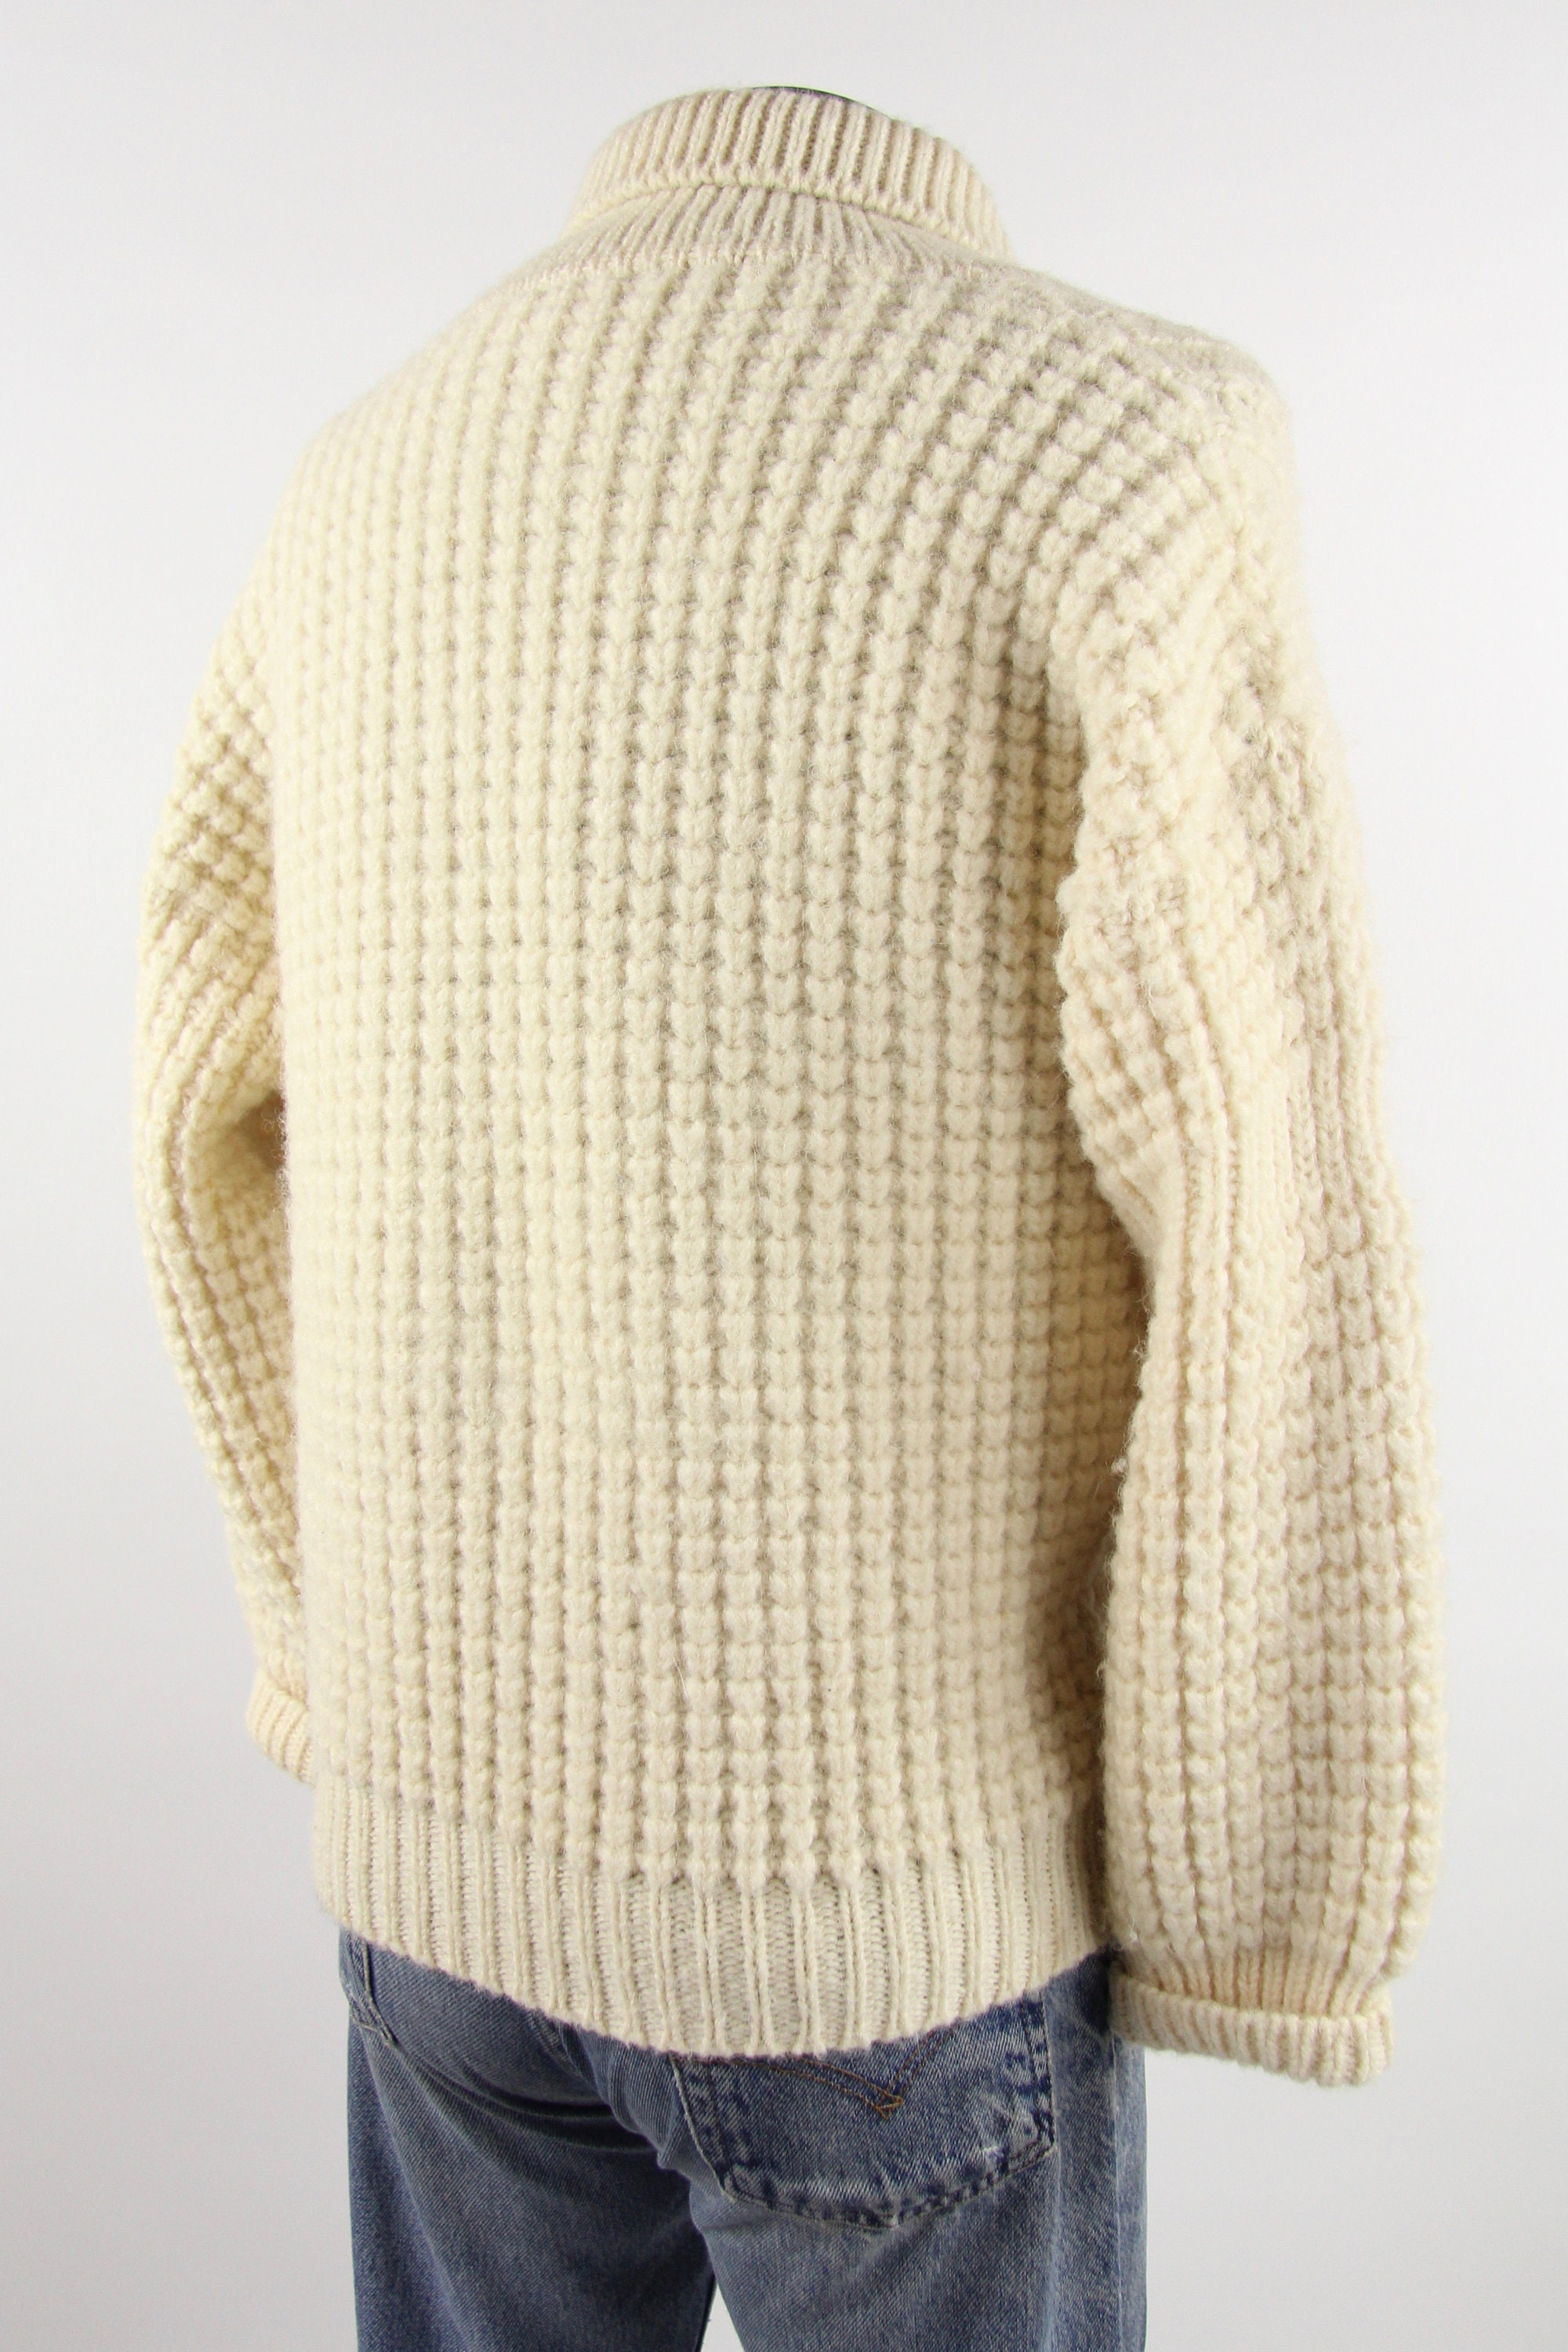 Men's Pullover Sweater White Cream Hemingway Vintage Sweater Size Small ...